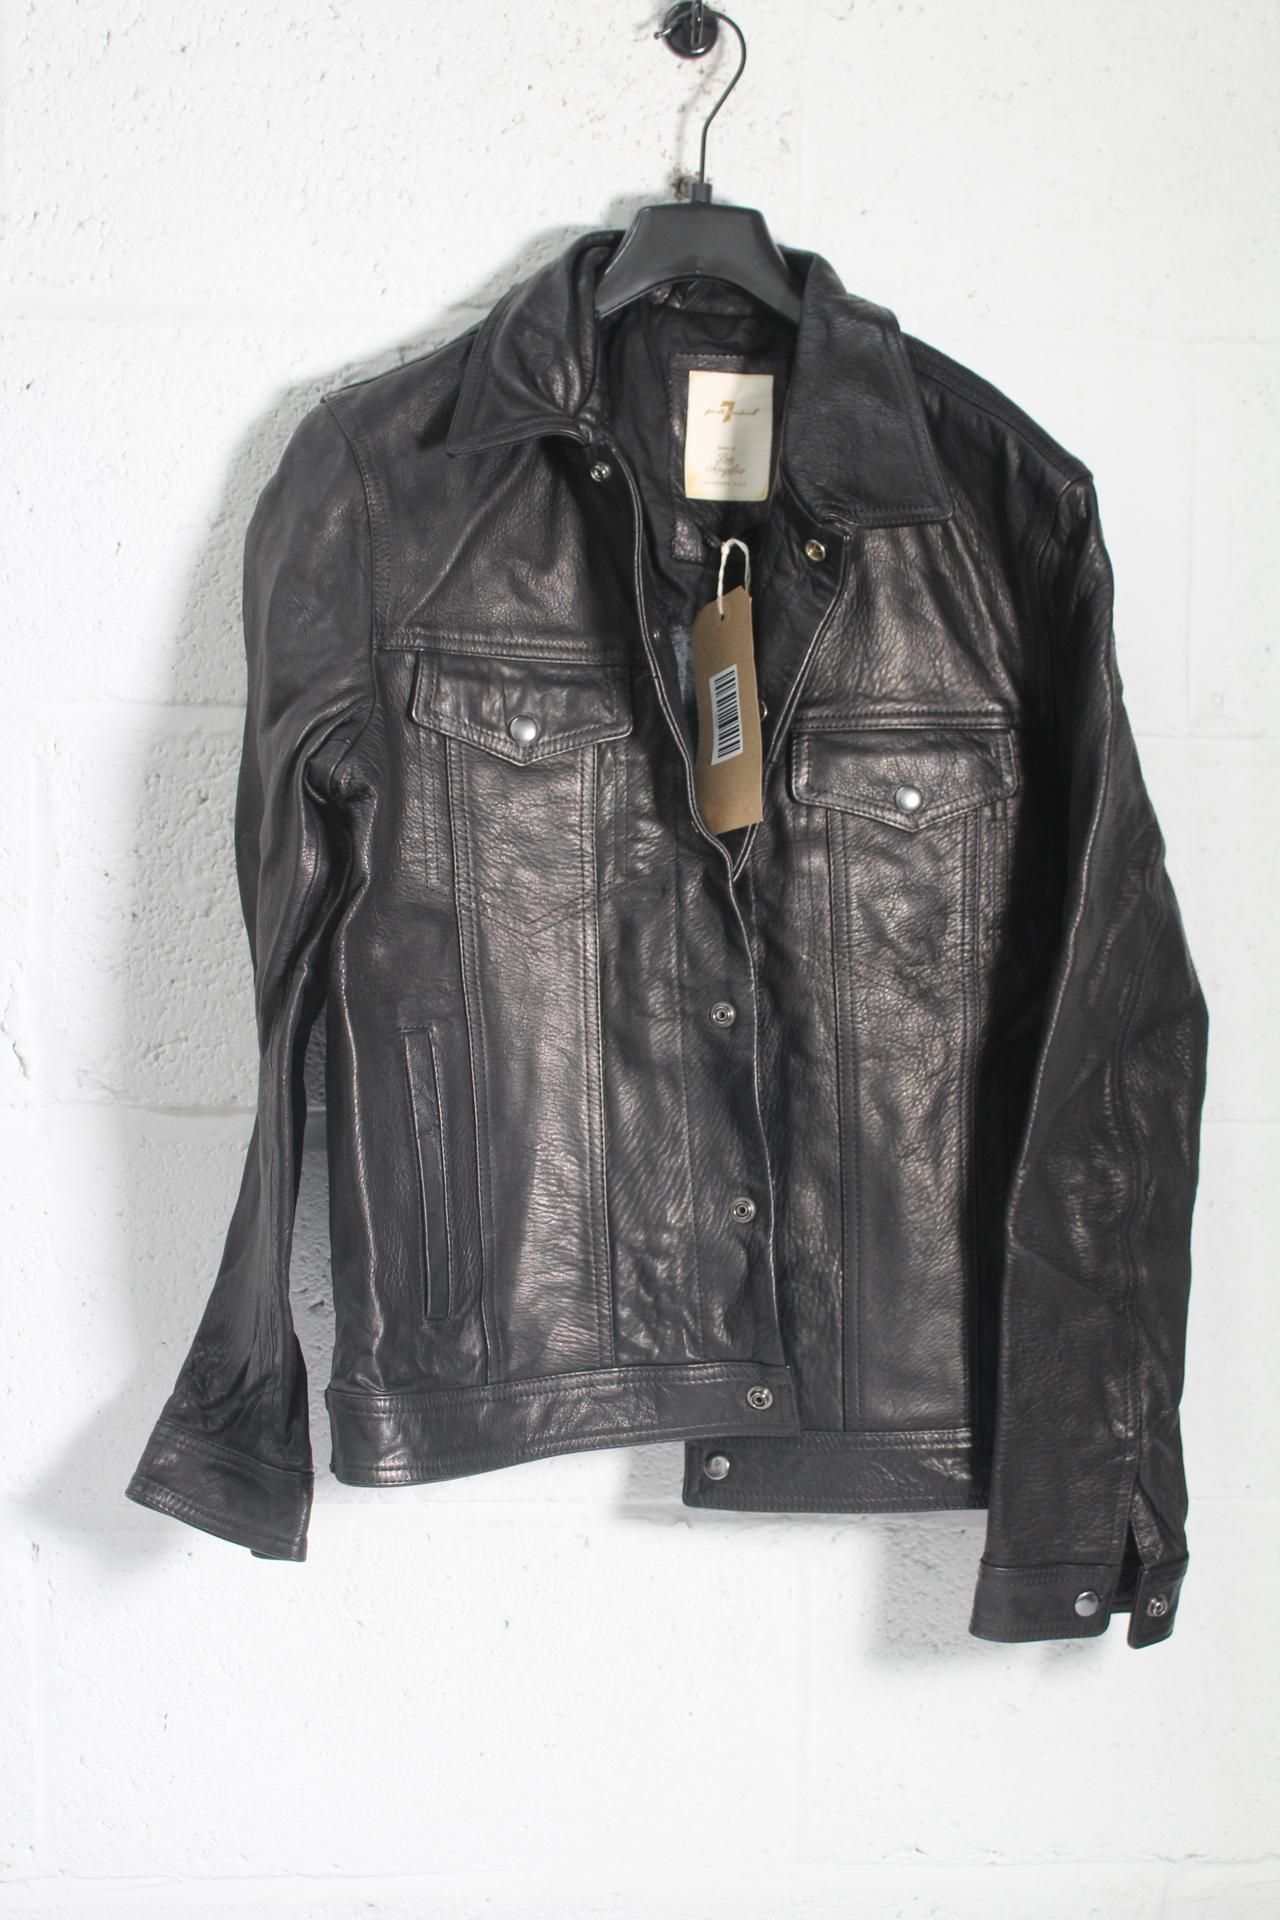 A men's pre-owned 7 For All Mankind Trucker Jacket - black leather (M).